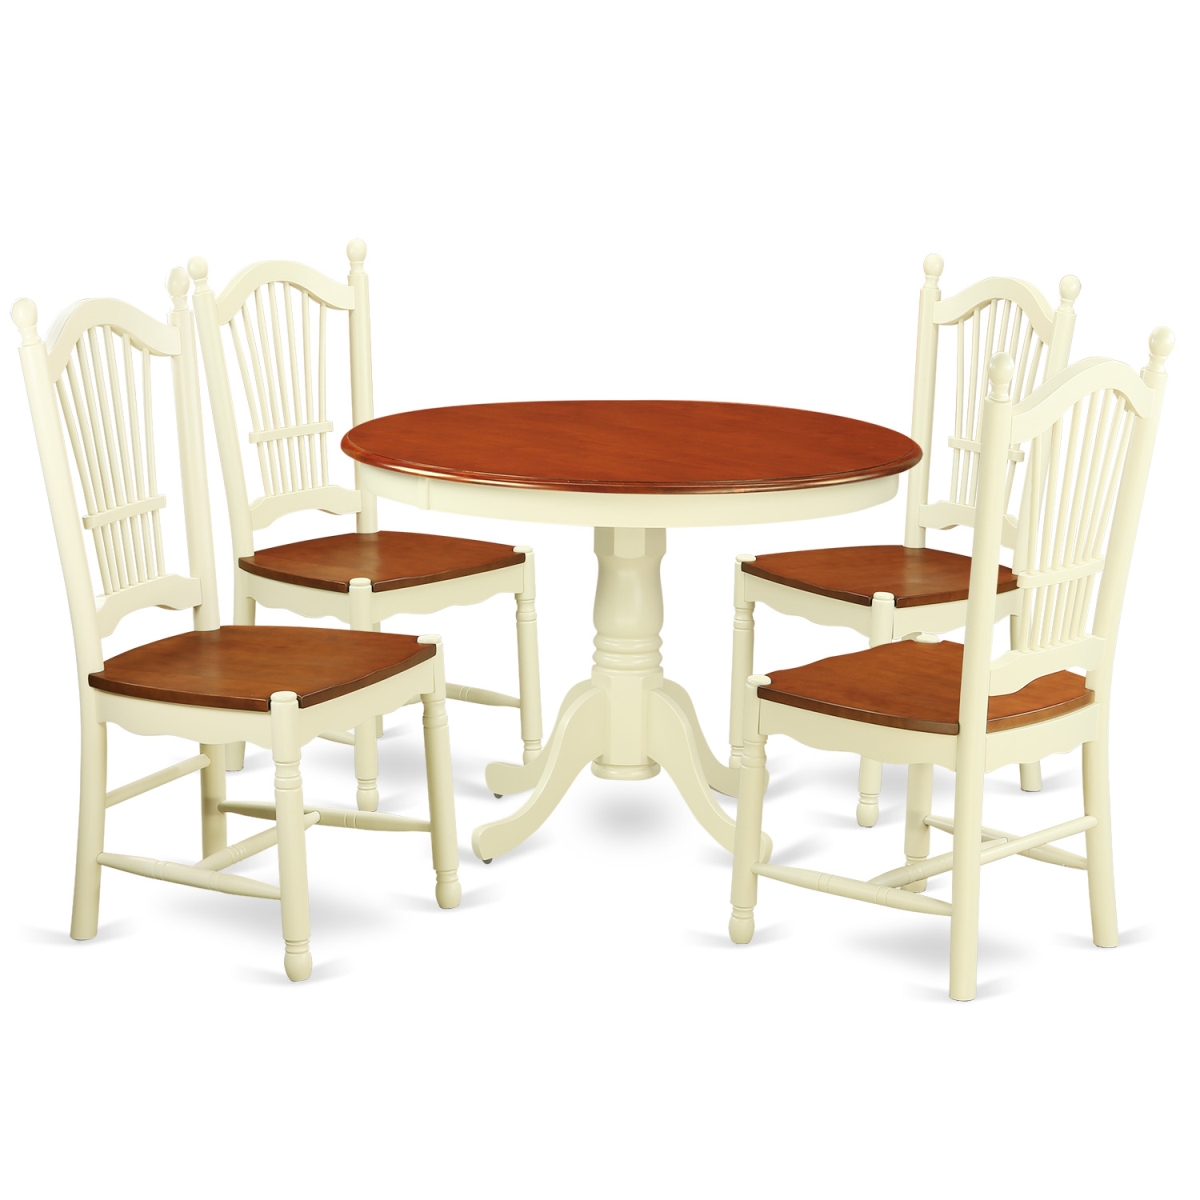 GSI Homestyles Dining Set - One Round Small Table & Four Chairs with Wood Seat&#44; Buttermilk & Cherry - 5 Piece - 42 in.